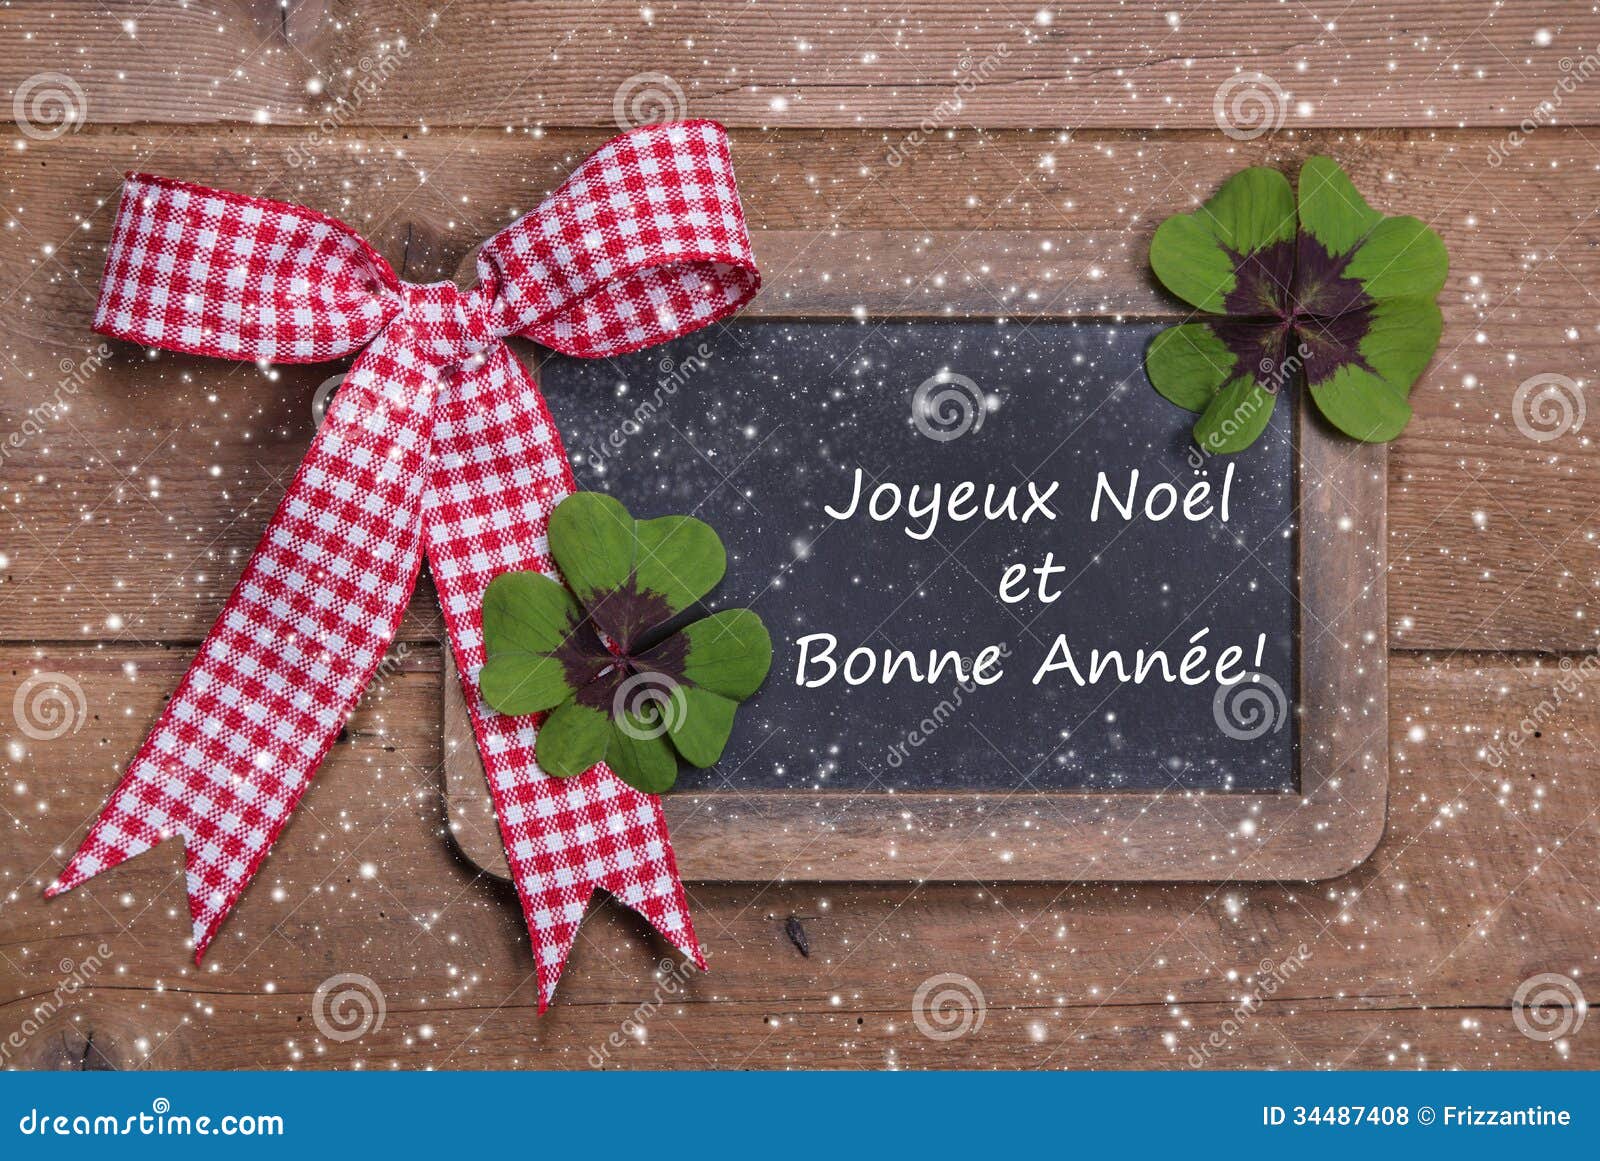 Christmas And Happy New Year In French Words Royalty Free Stock Photos ...